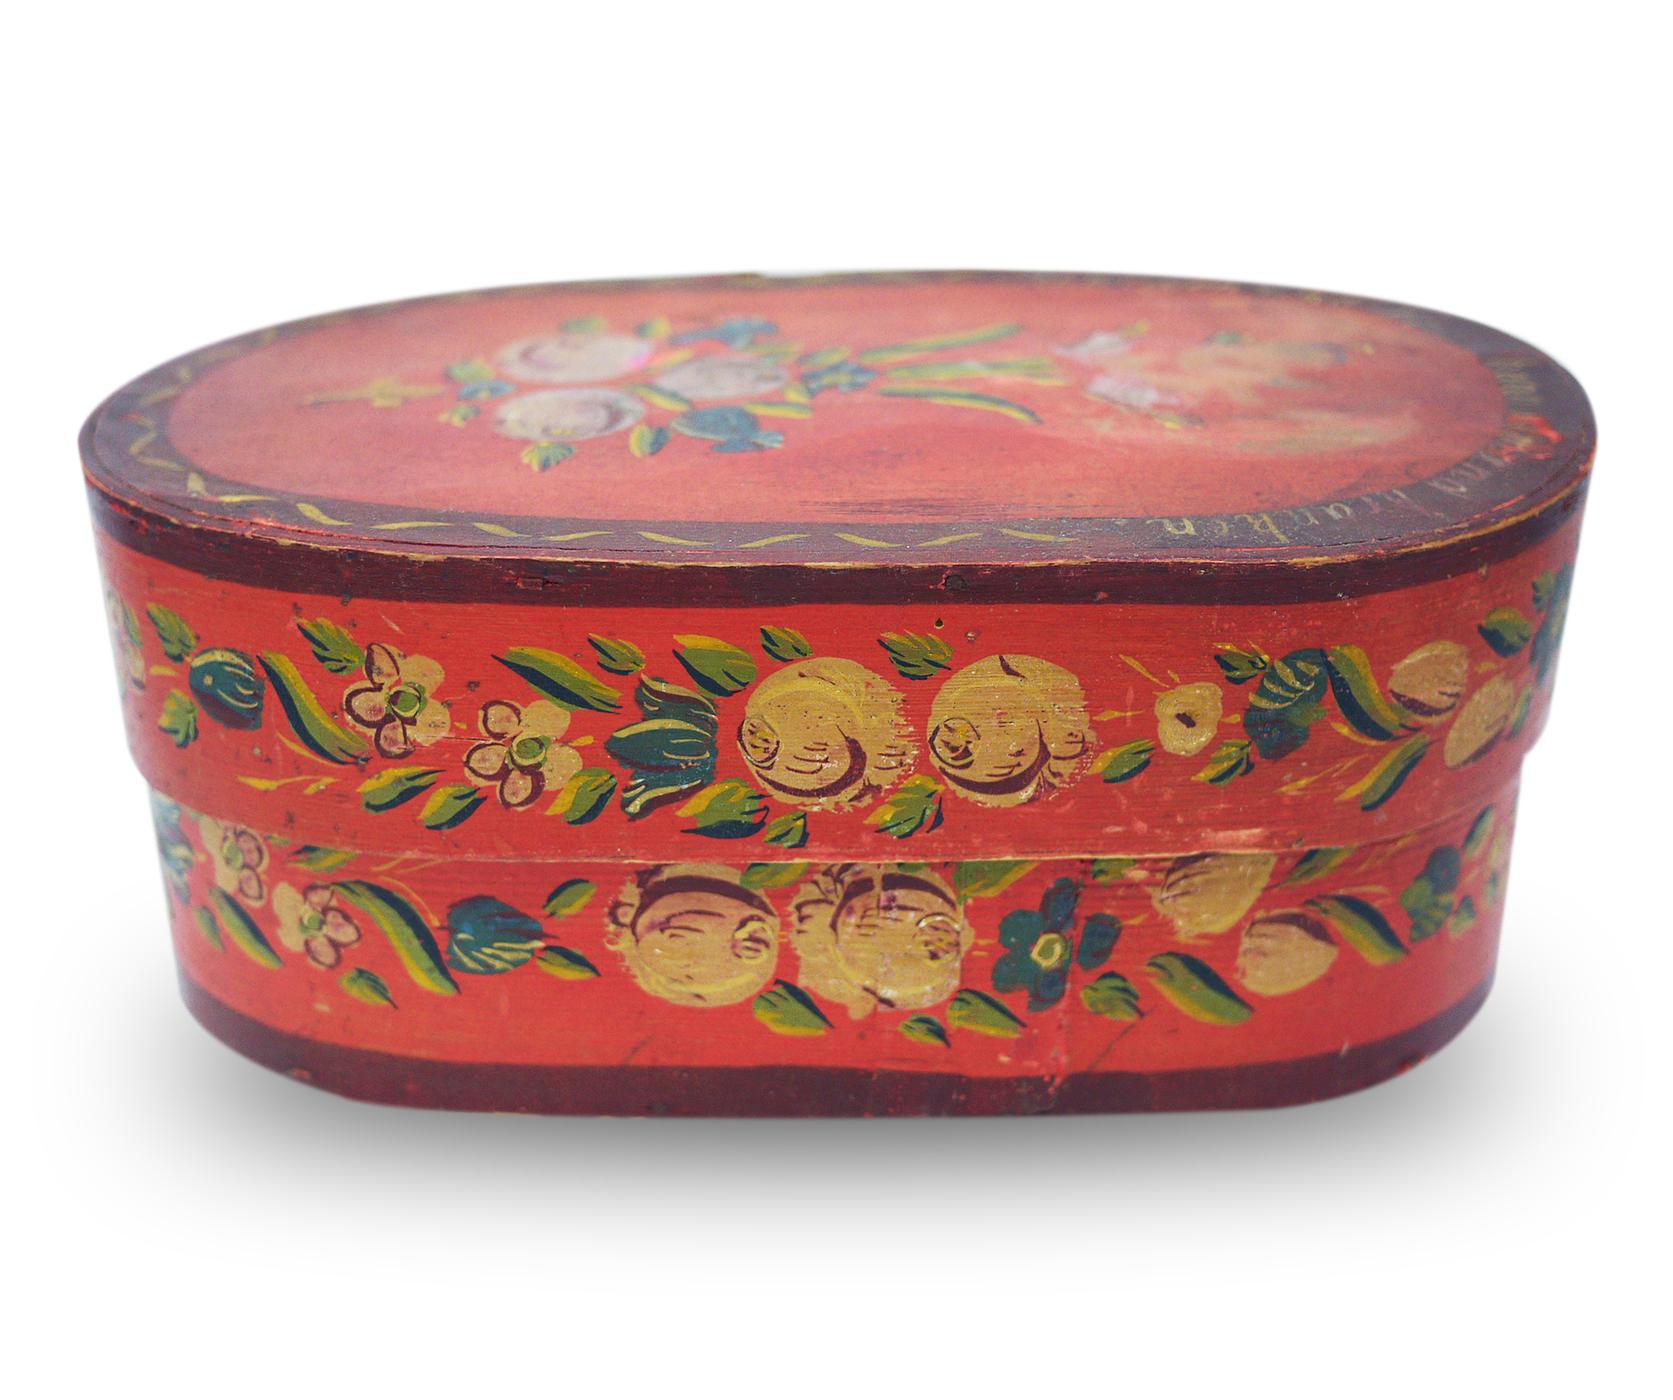 Alpine painted box

Measures: H 12cm, W 30cm, D. 18cm
H. 4.7in, W. 11.8 in, D 7.1in

Fir-tree box painted in red. On the whole surface there are floral motifs.
On the lid the phrase 